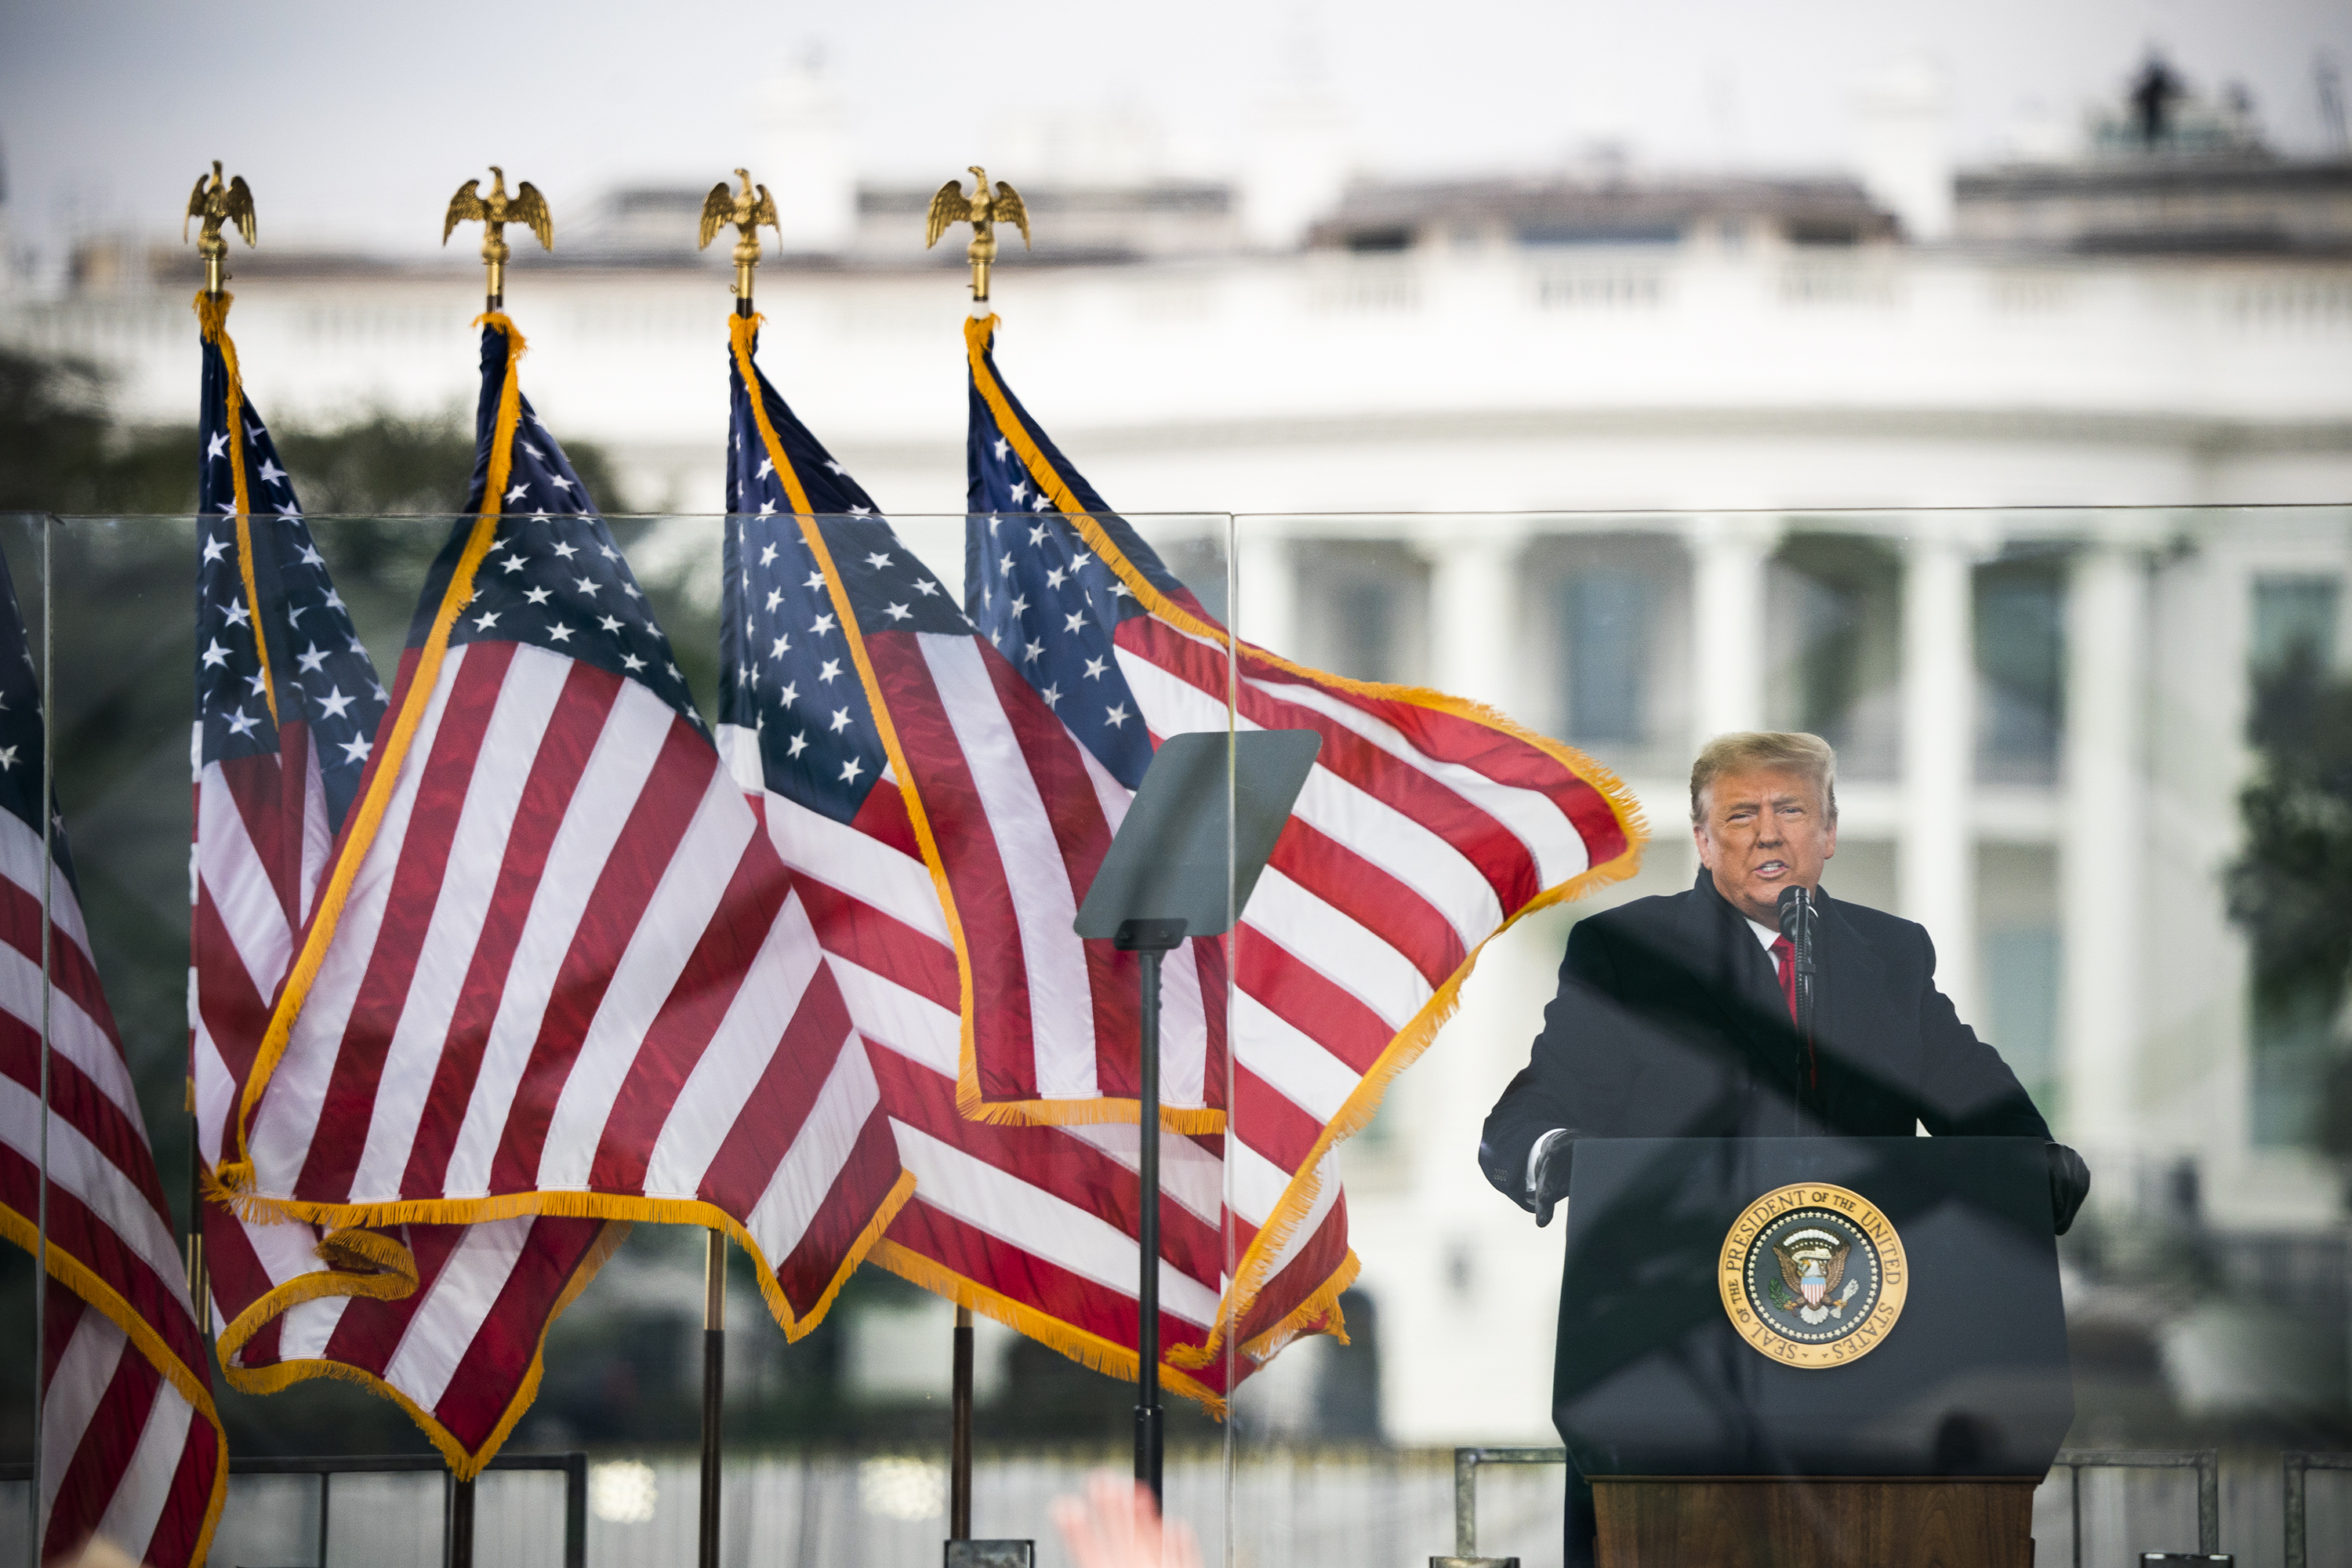 President Donald Trump Stands Behind a Lectern Flanked by American Flags